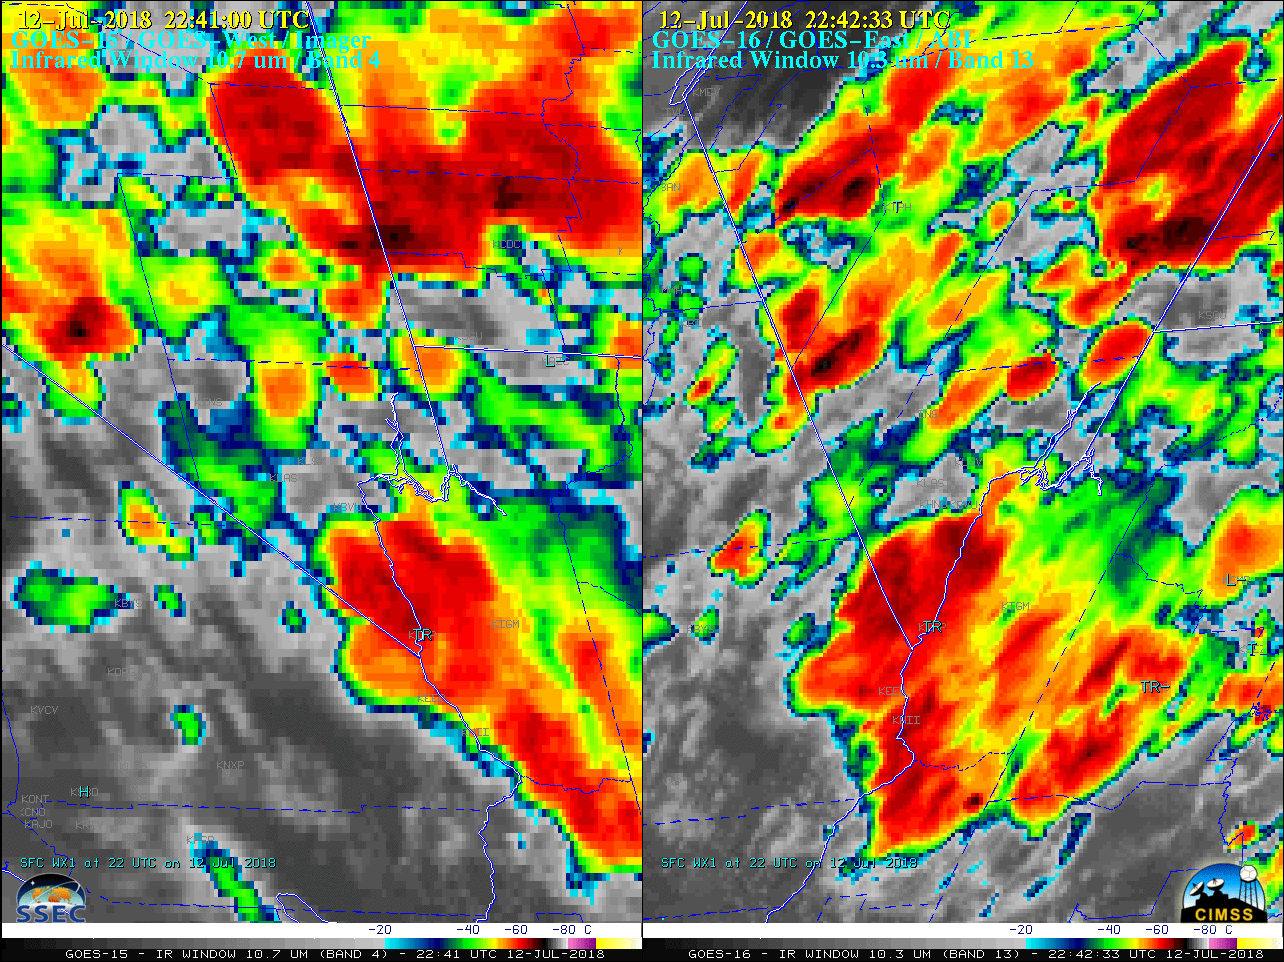 GOES-15 Infrared Window (10.7 µm, left) and GOES-16 "Clean" Infrared Window (10.3 µm, right) images [click to play MP4 animation]